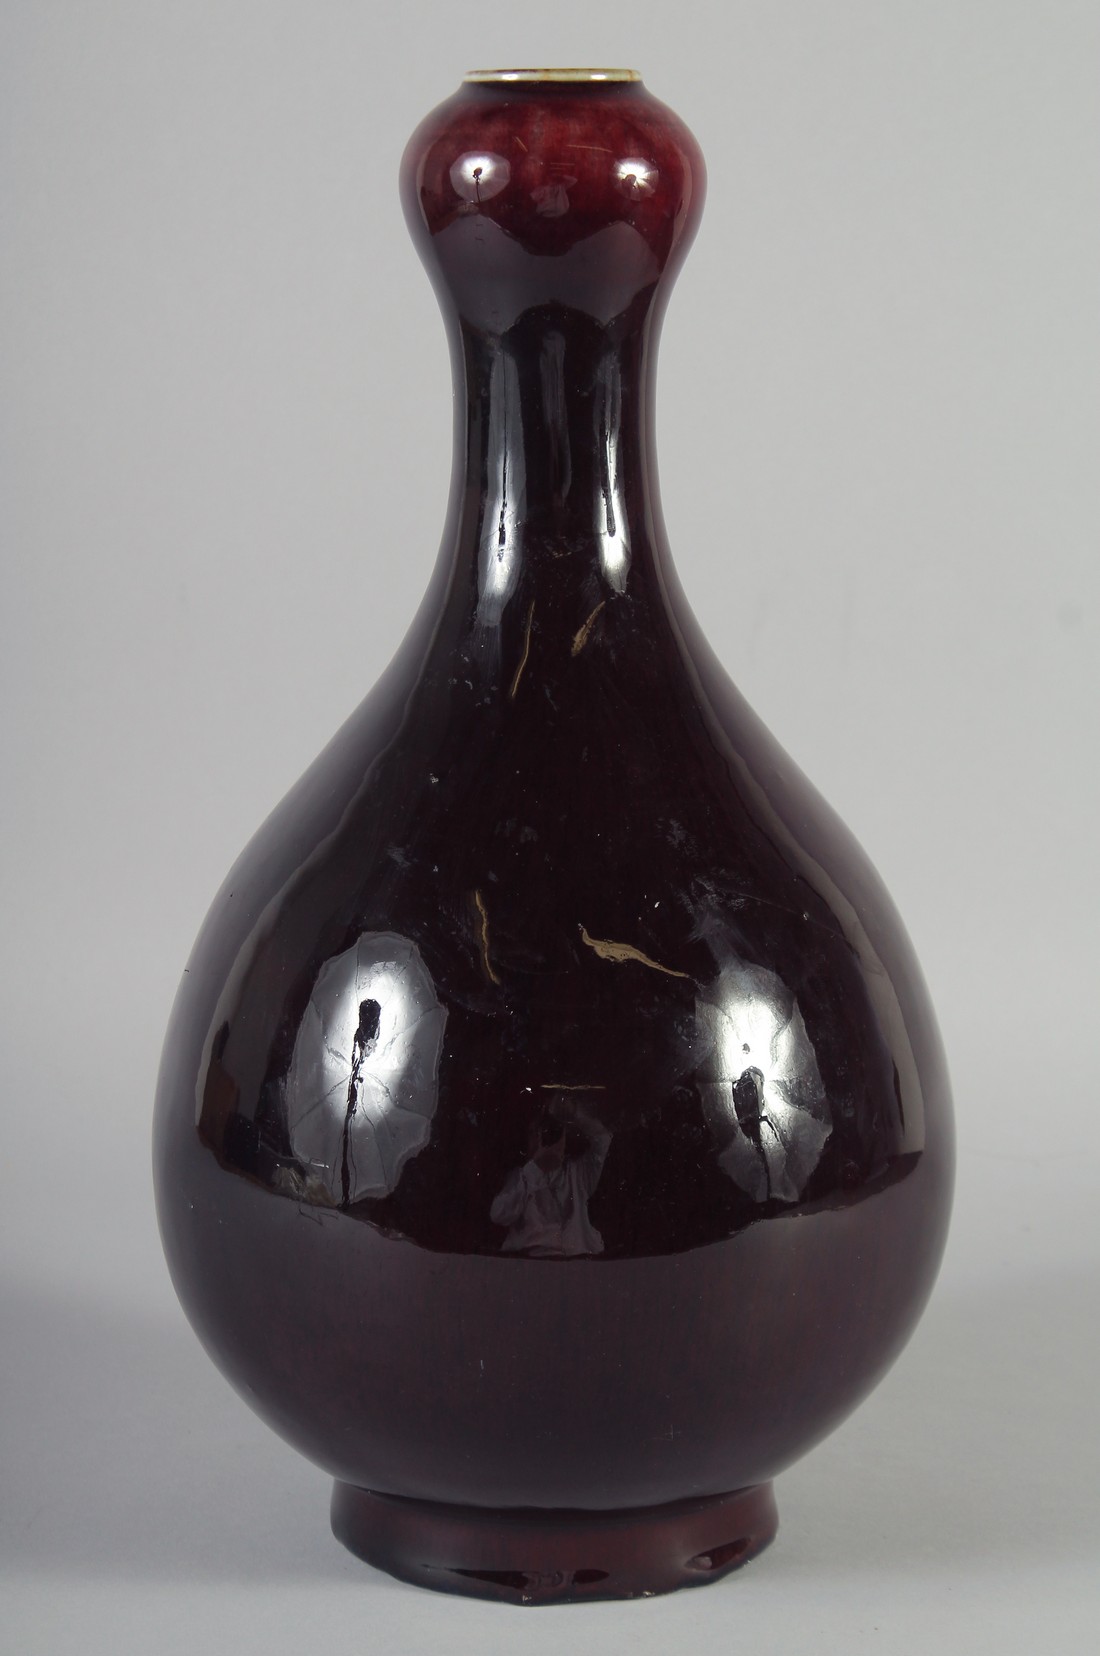 A CHINESE FLAMBE GLAZED PORCELAIN BOTTLE VASE, with a garlic neck, the sides applied with a dark